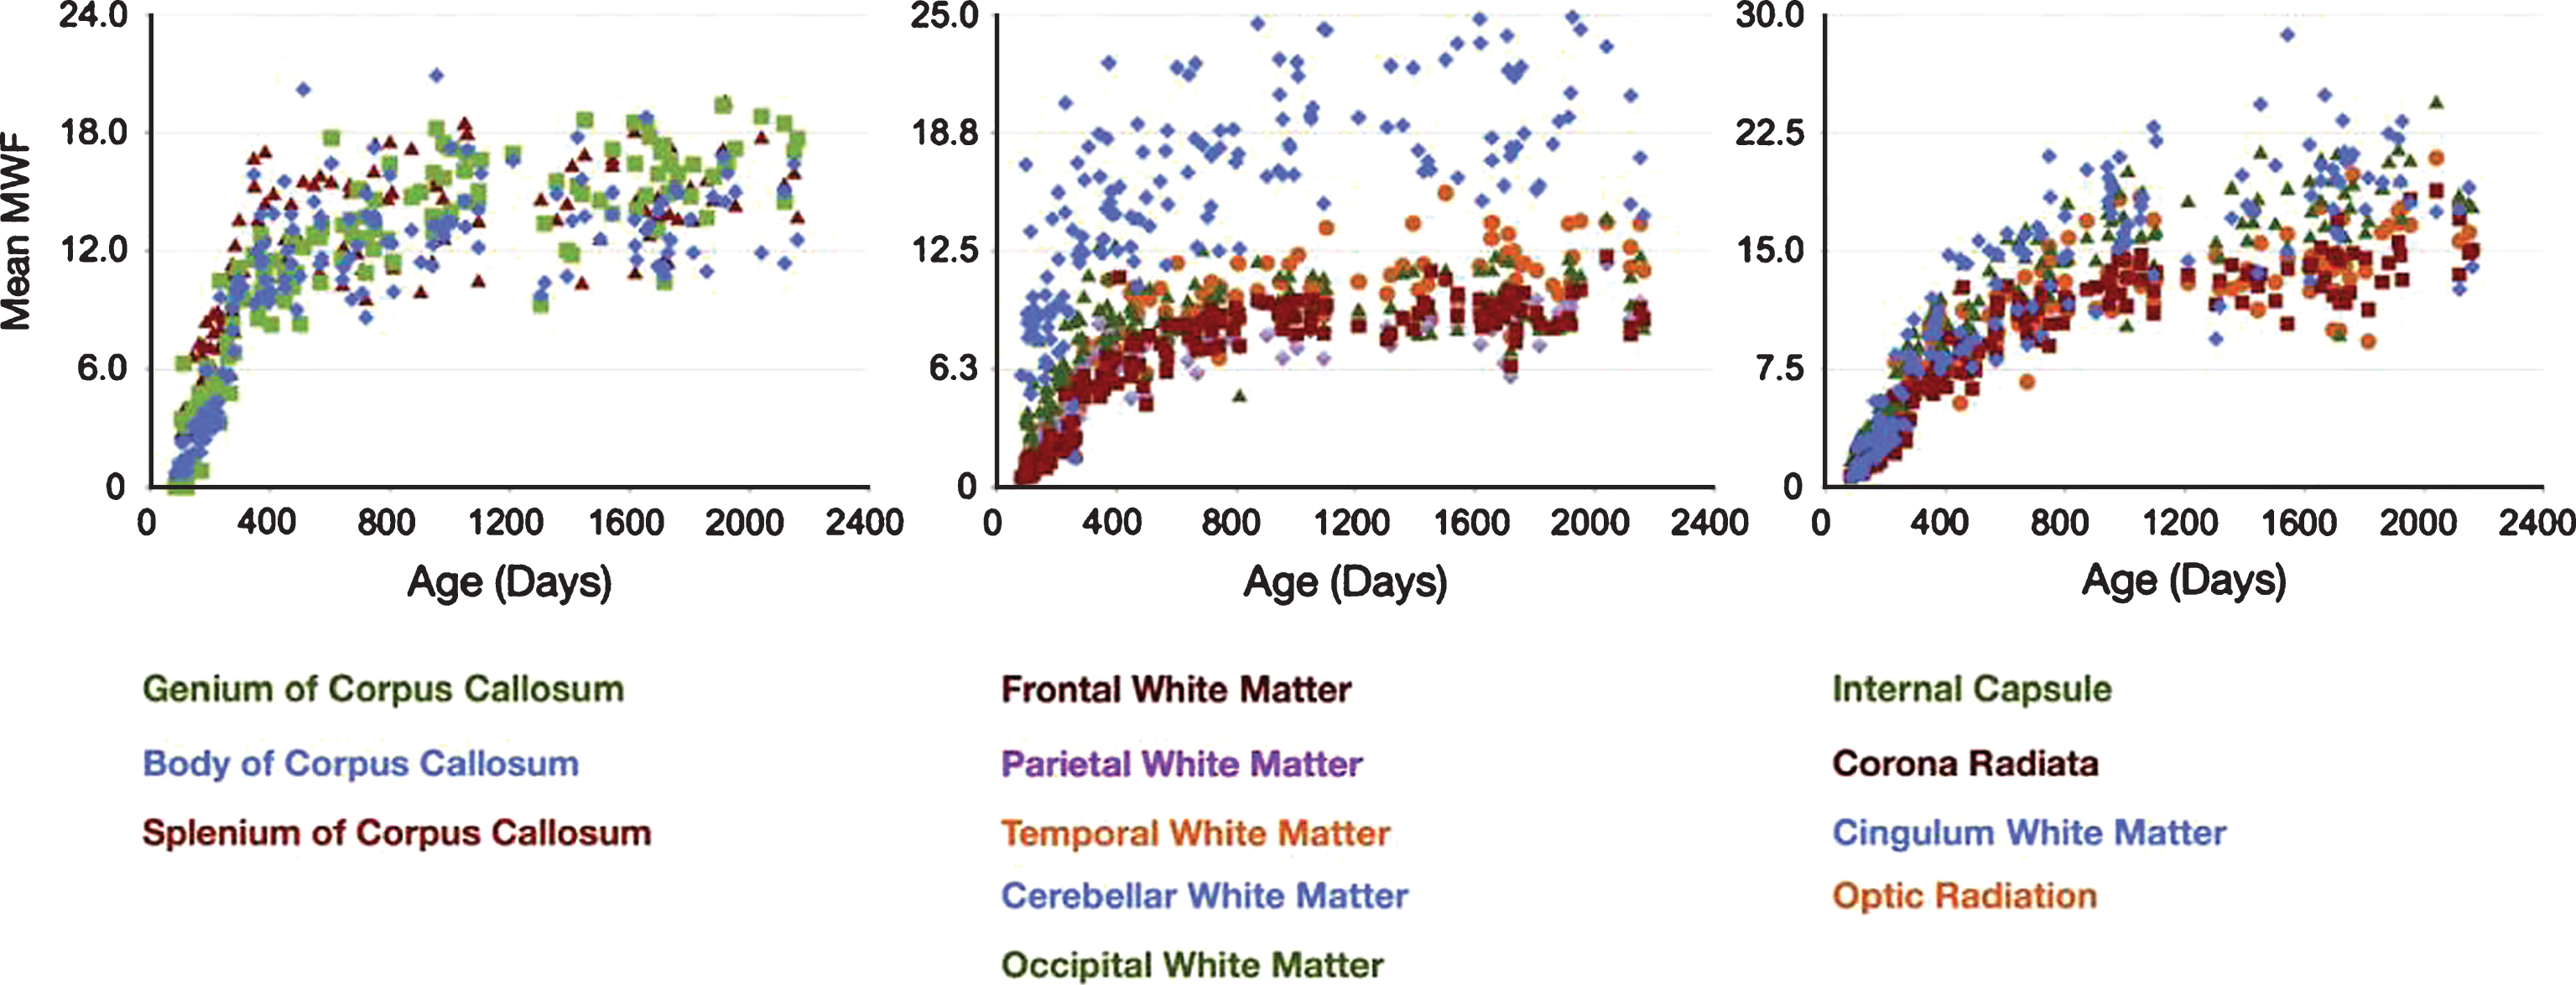 Gender-combined myelination trajectories for each white matter region and pathway spanning 83 through 2040 days of age. Points represent the mean values with error bars corresponding to the measurement standard deviation (Fig. 6, Deoni SC, Dean DC, 3rd, O’Muircheartaigh J, Dirks H, Jerskey BA. Investigating white matter development in infancy and early childhood using myelin water faction and relaxation time mapping. Neuroimage. 2012;63(3):1038-53).